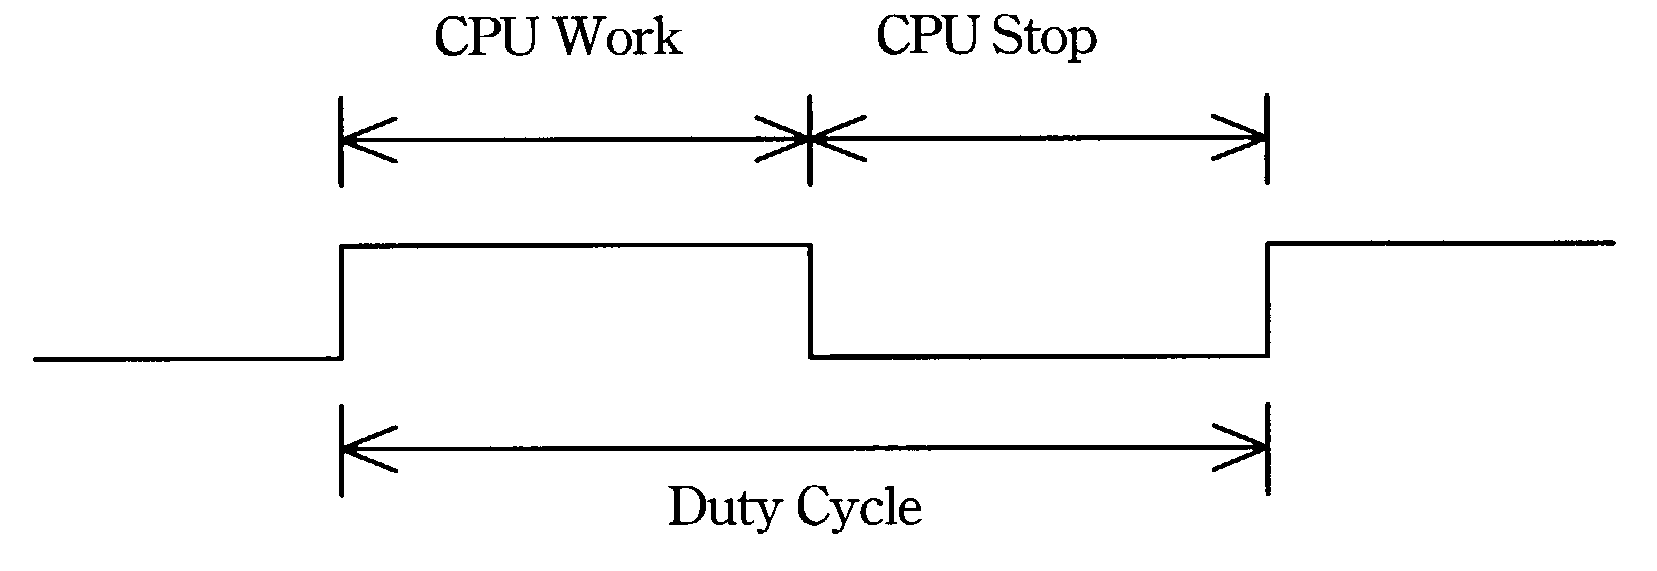 Performance control method for a computer